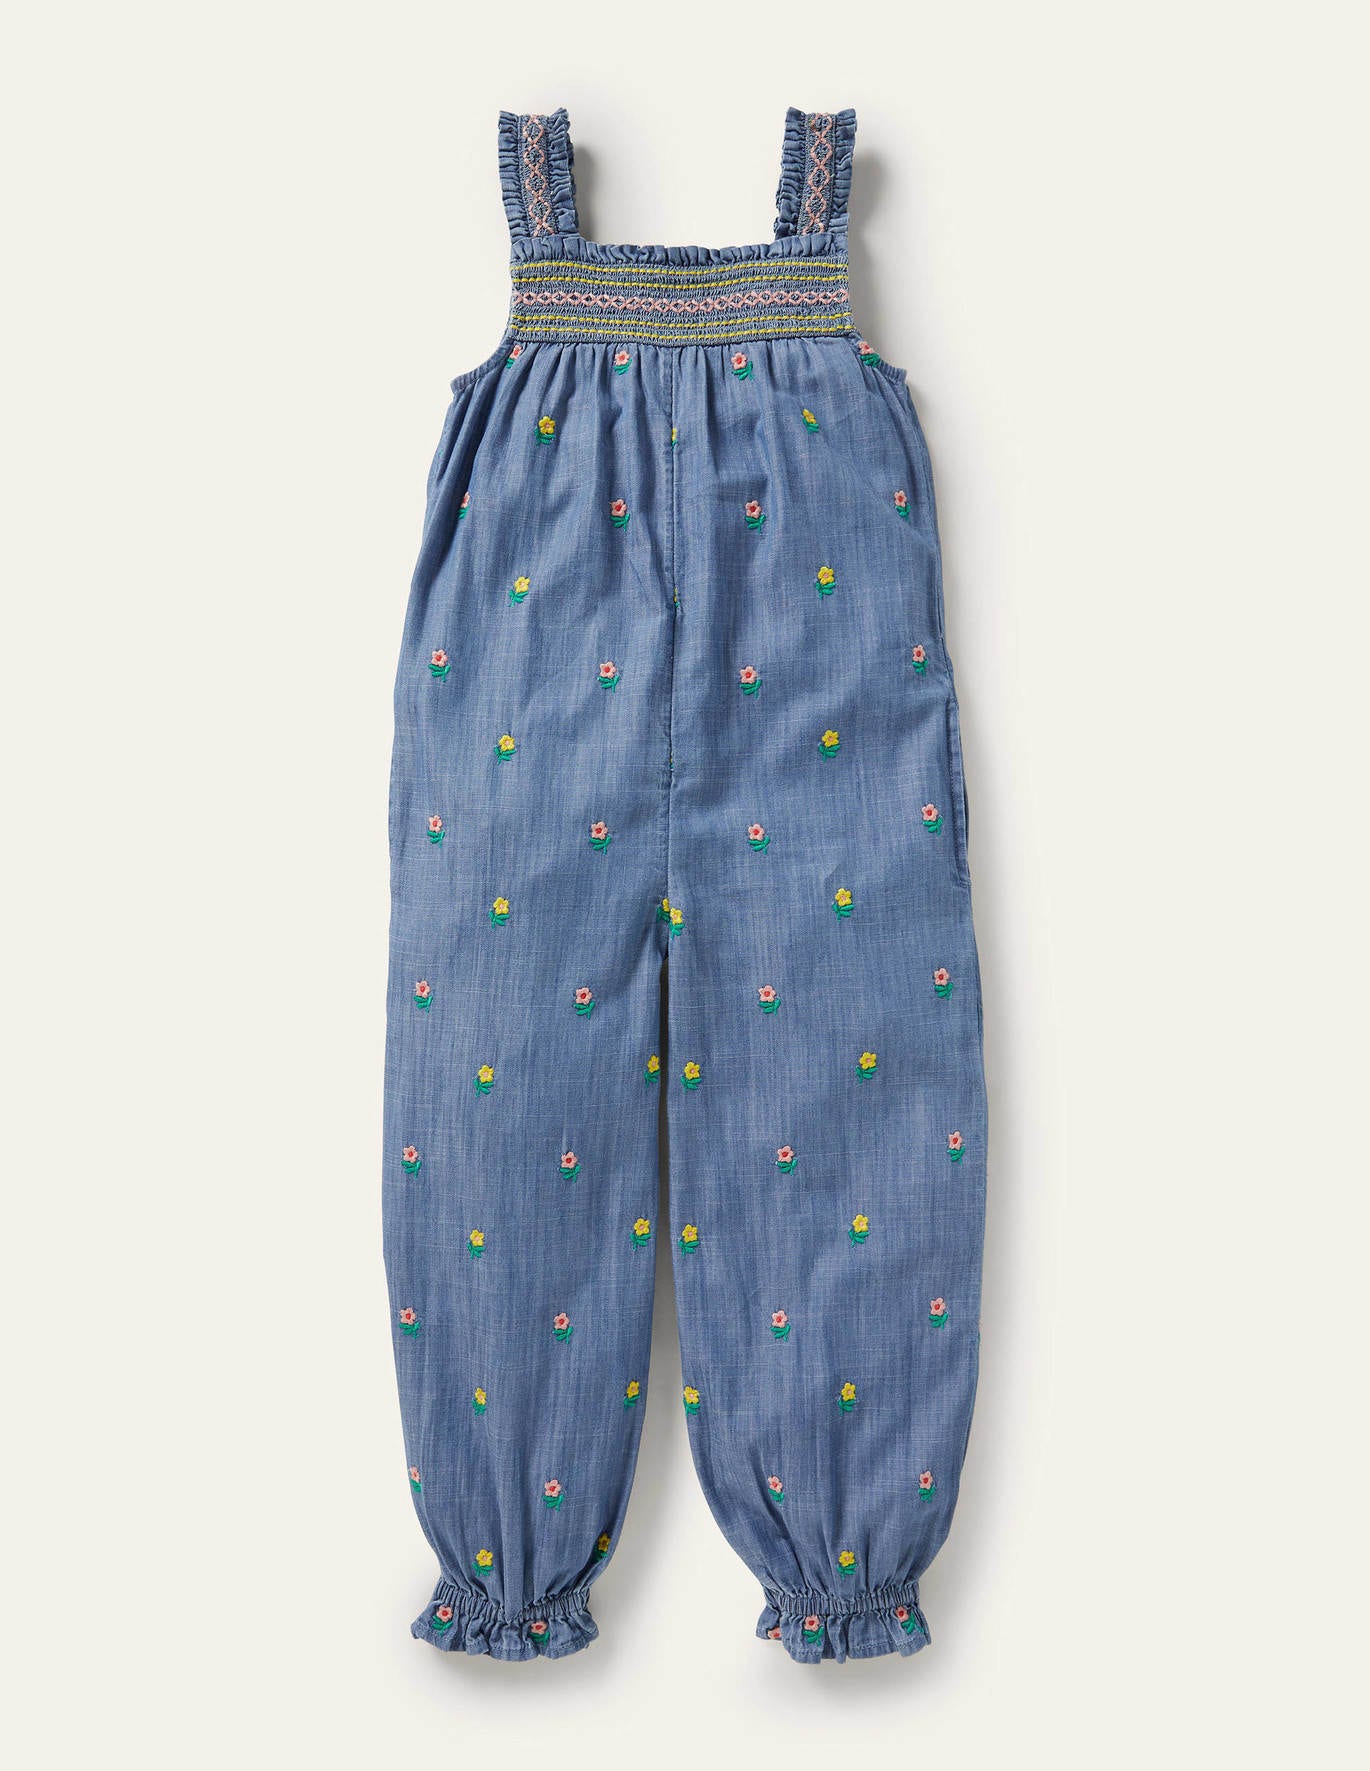 Boden Floral Smocked Overalls - Chambray Floral